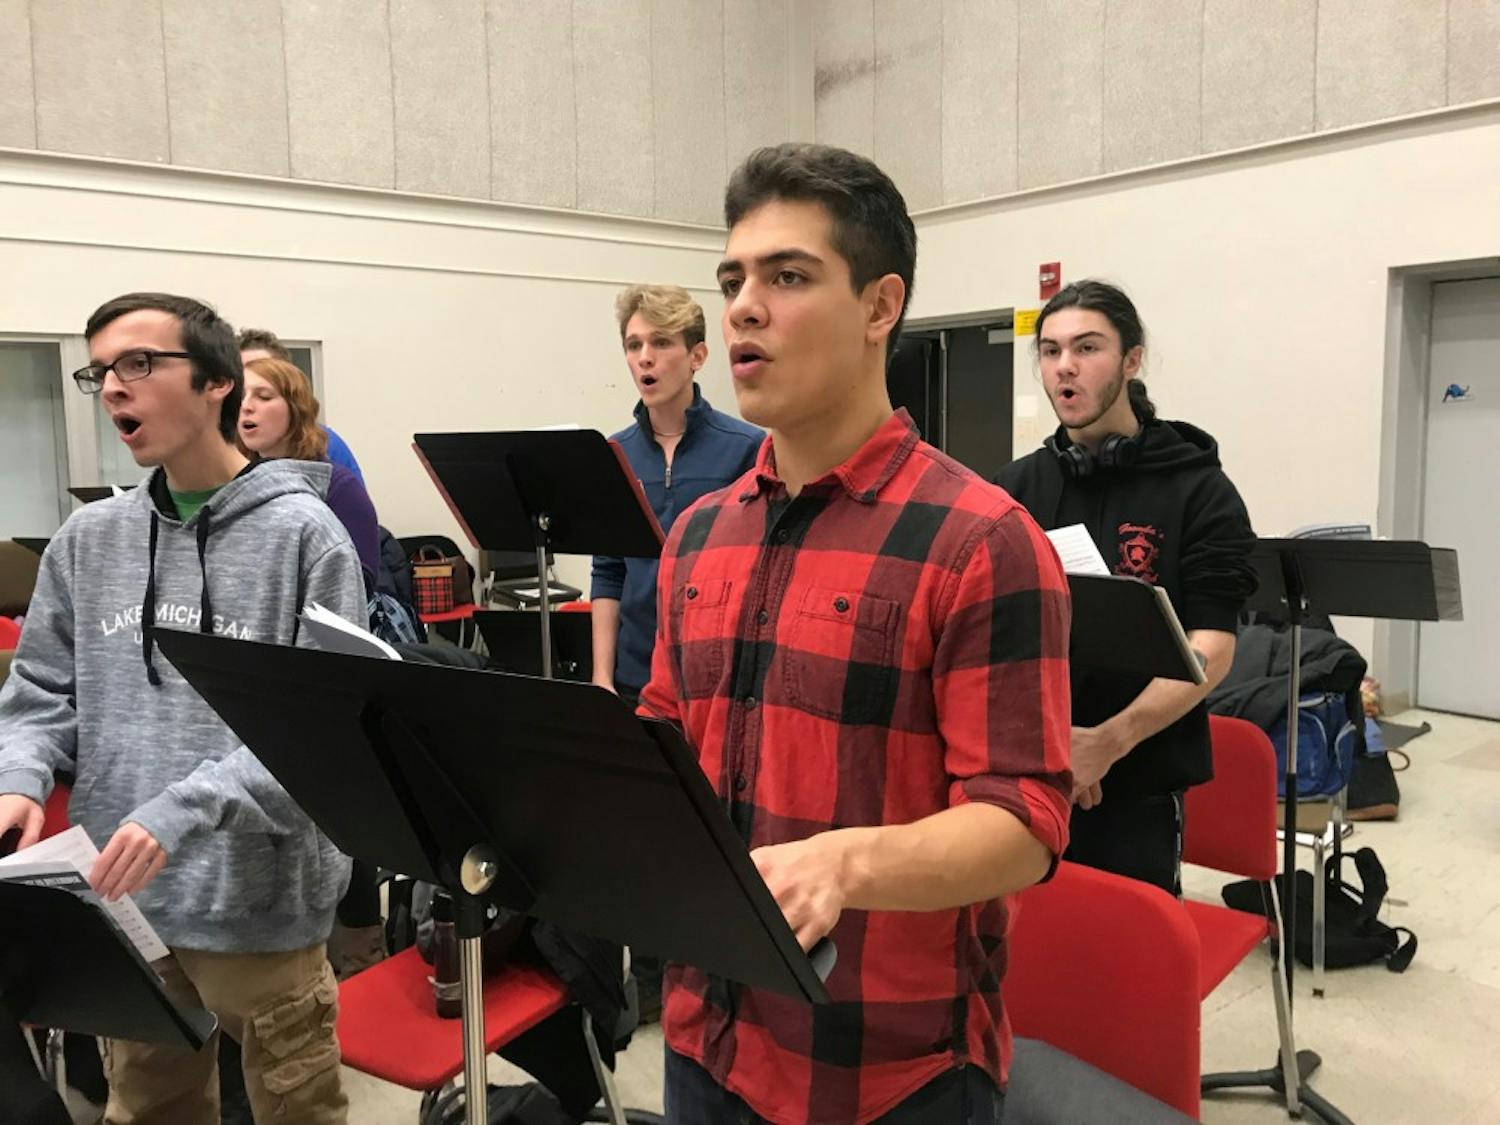 UB’s choir prepares for their upcoming holiday performances. The groups have been practicing since the beginning of the semester.